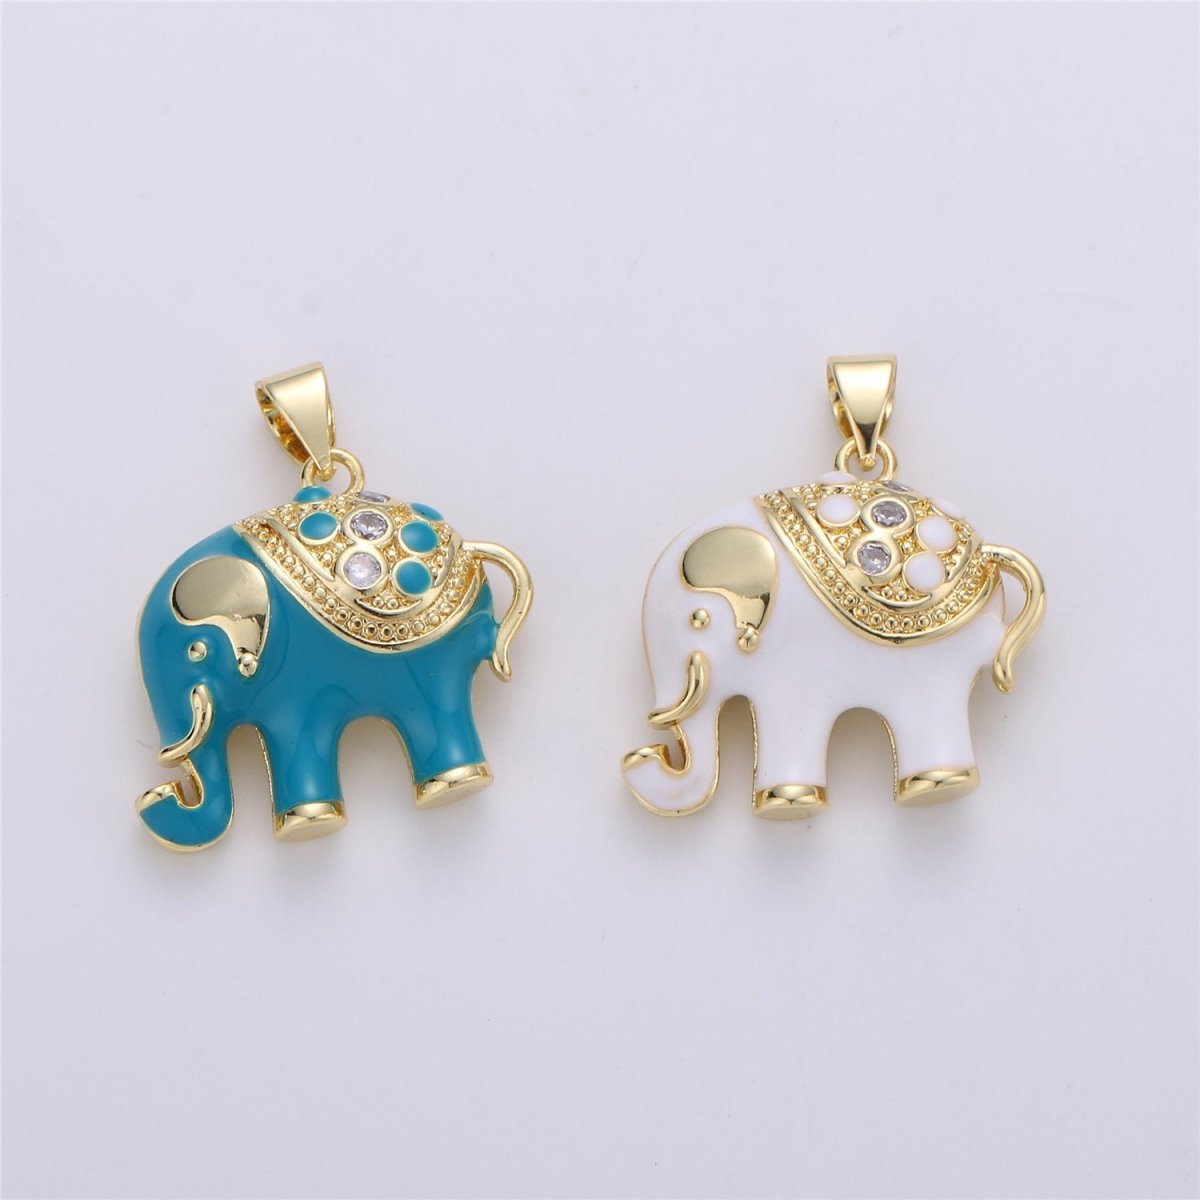 25mm Tiny Enamel Elephant Charms Blue White Elephant Necklace Pendant in Gold Filled for Necklace Charm with CZ Stone Cubic animal Charm I-175 I-177 I-178 - DLUXCA